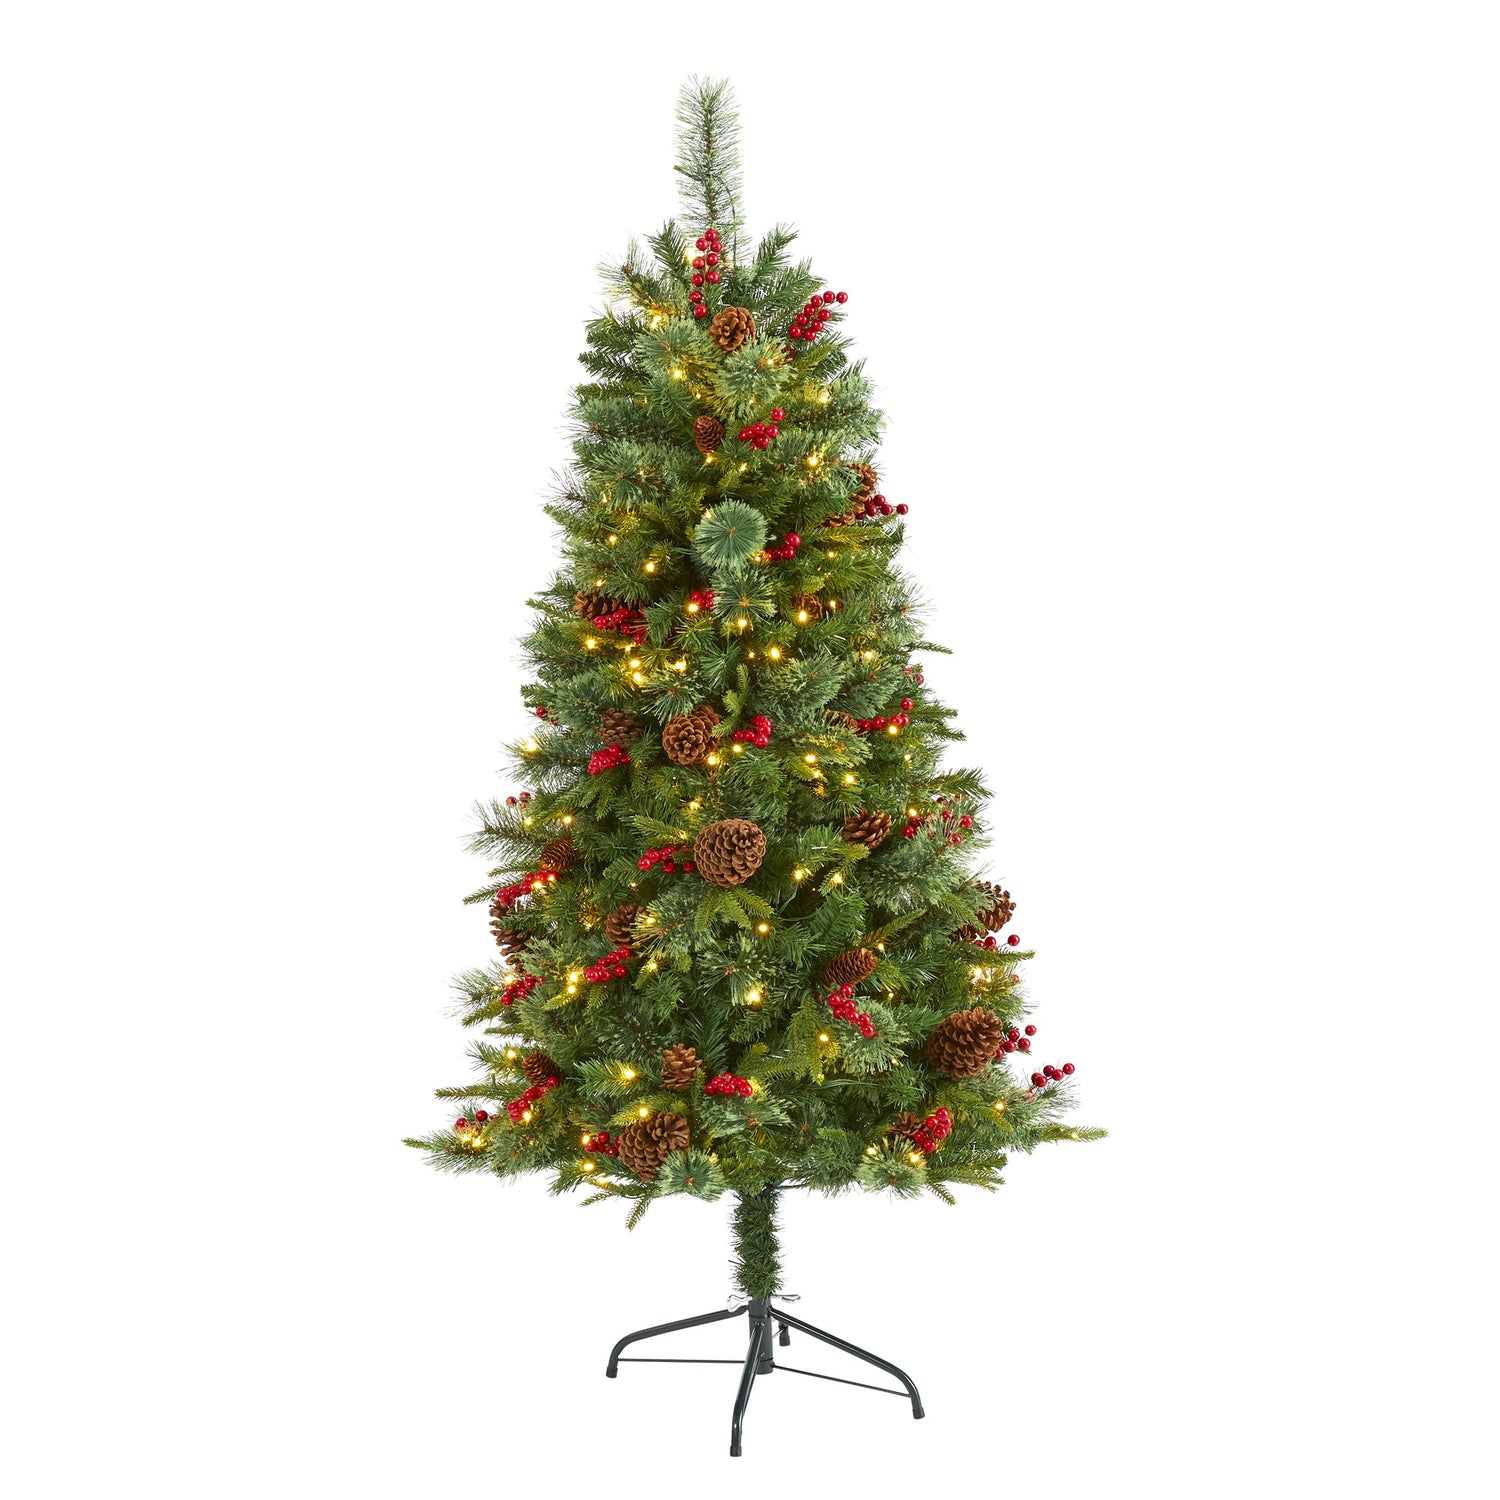 5’ Norway Mixed Pine Artificial Christmas Tree with 200 Clear LED Lights, Pine Cones and Berries